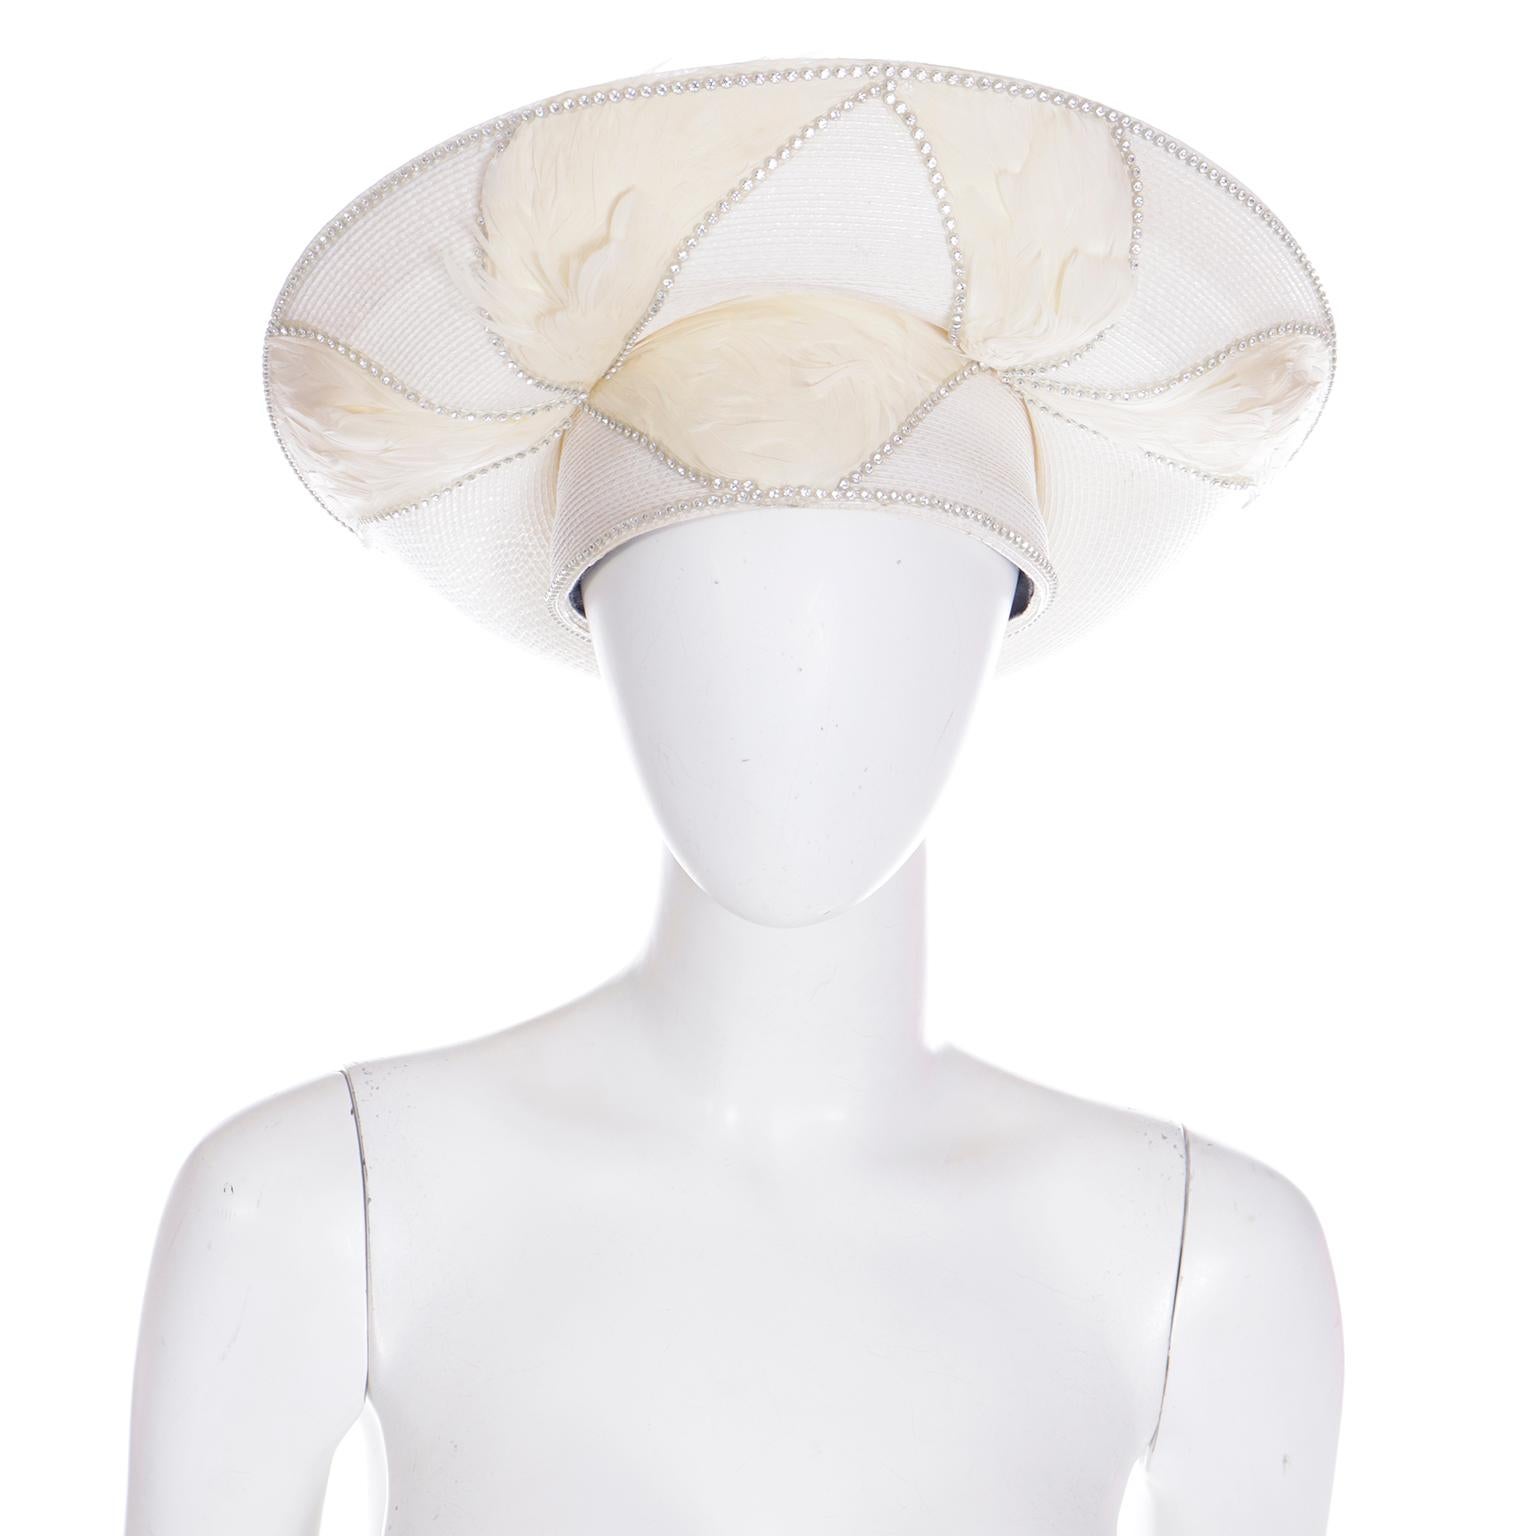 This lovely unique, dramatic vintage hat is from Makins New York. The hat is made of coated white straw, cream feathers and rhinestones. This wide brim, high angled hat has beautiful rhinestones outlining the brim, headband and feathers.
We acquired